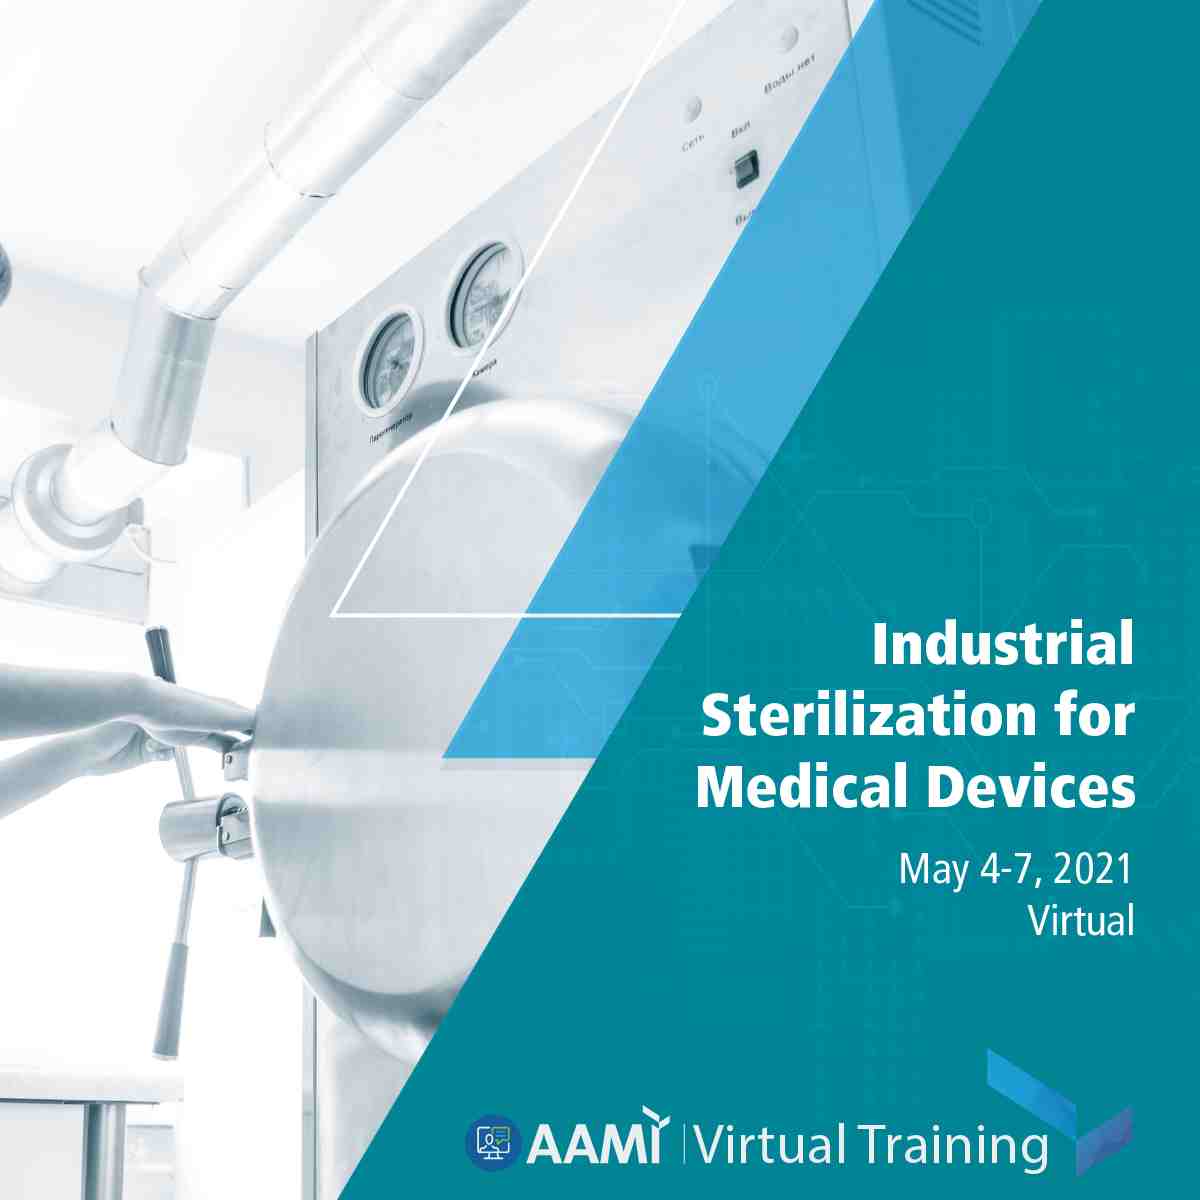 Industrial Sterilization for Medical Devices